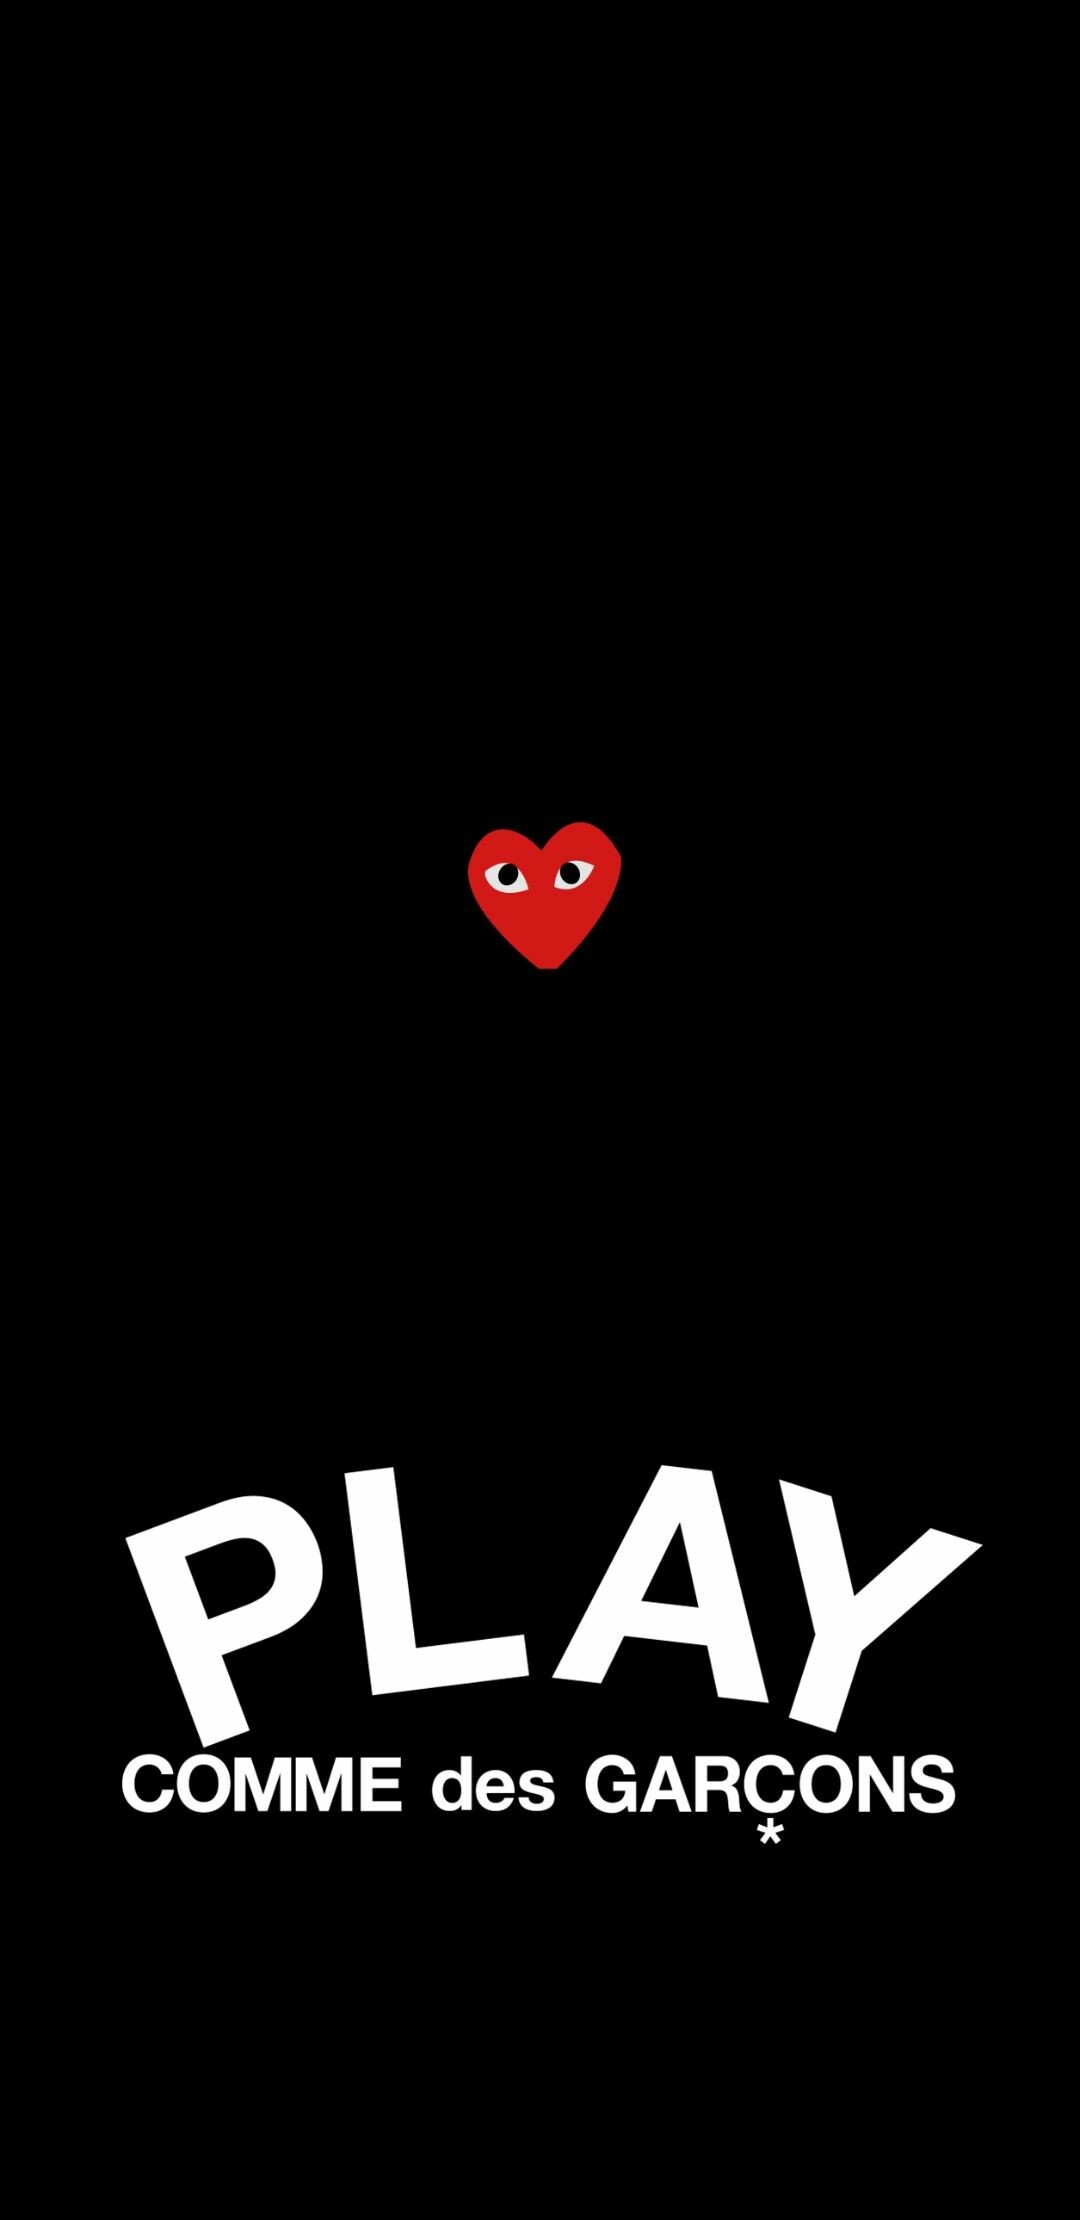 HD wallpaper, 1080X2220 Hd Phone, Comme Des Garcons X Supreme, Iconic Fashion, Streetwear Collaboration, Phone Hd Comme Des Garcons Background, Hypebeast Style